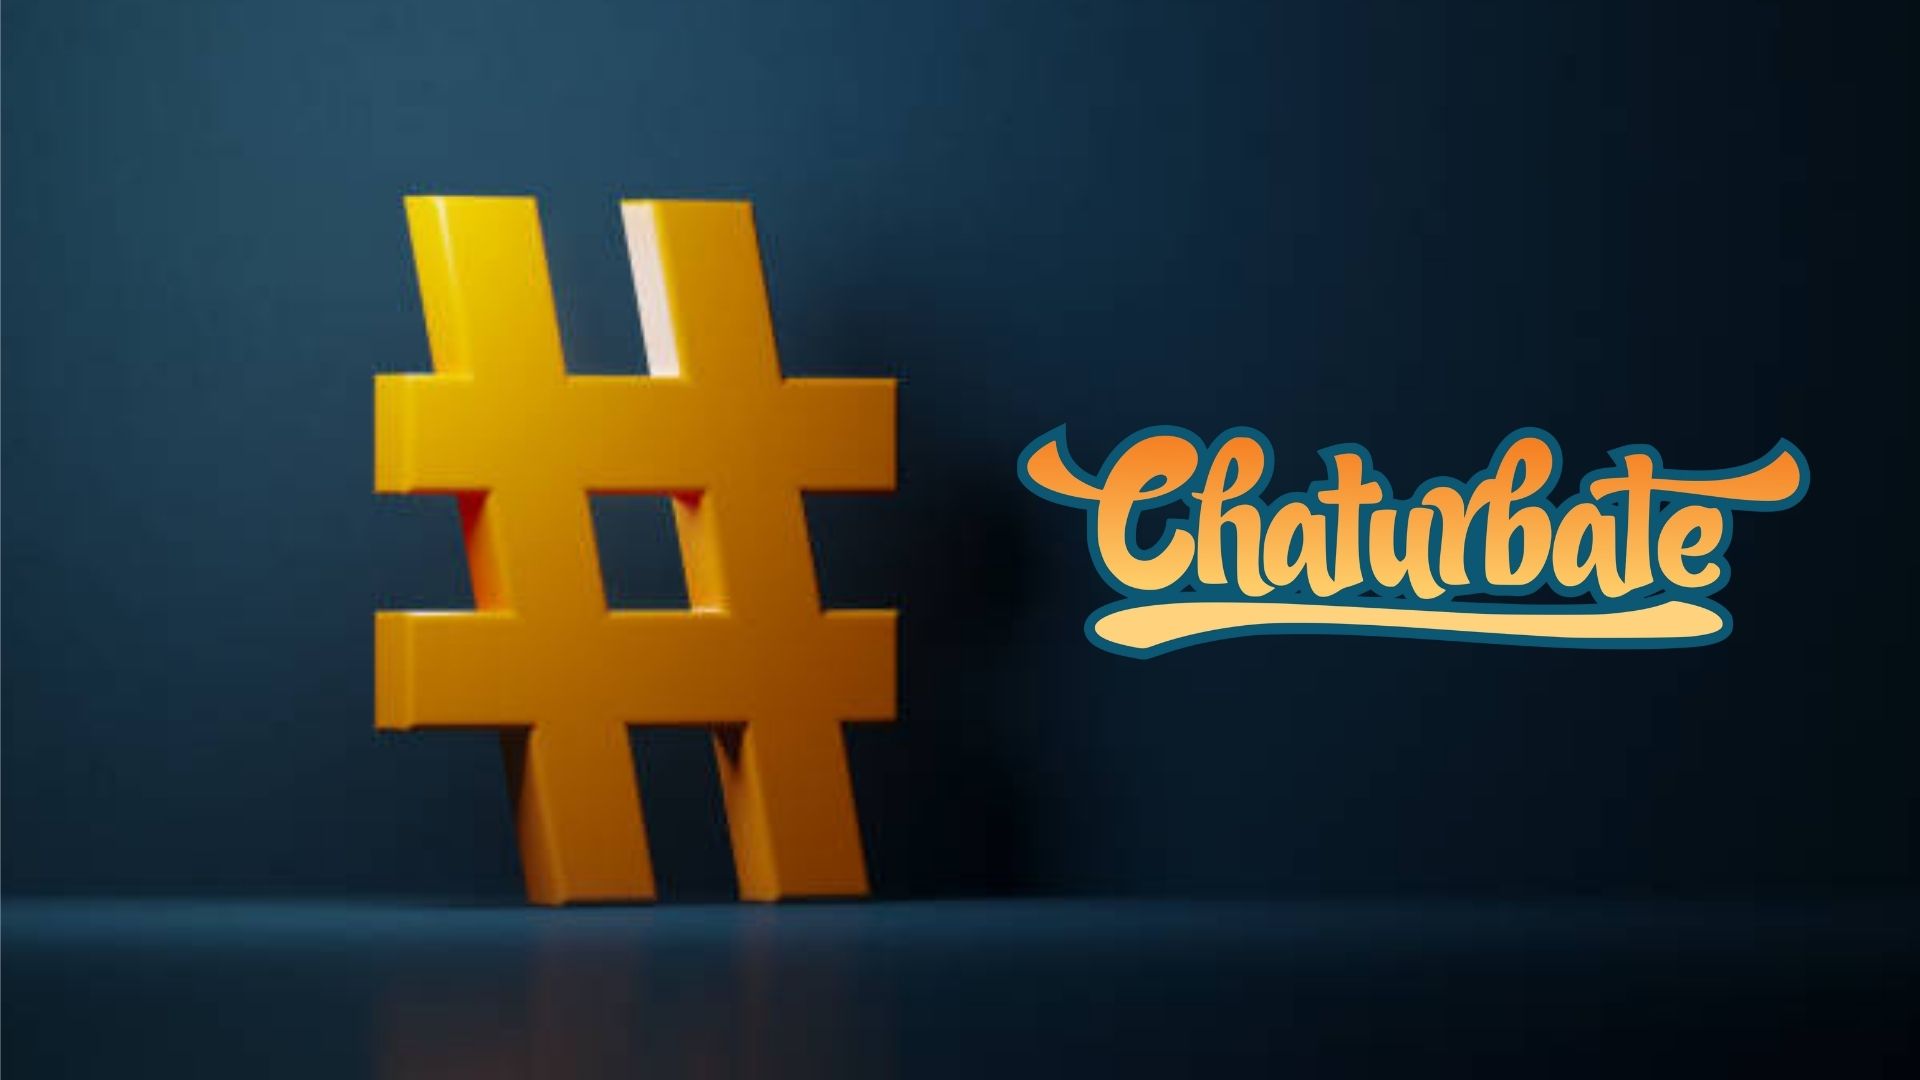 Top 20 Best & Most Popular Twitter & Instagram Hashtags For Chaturbate